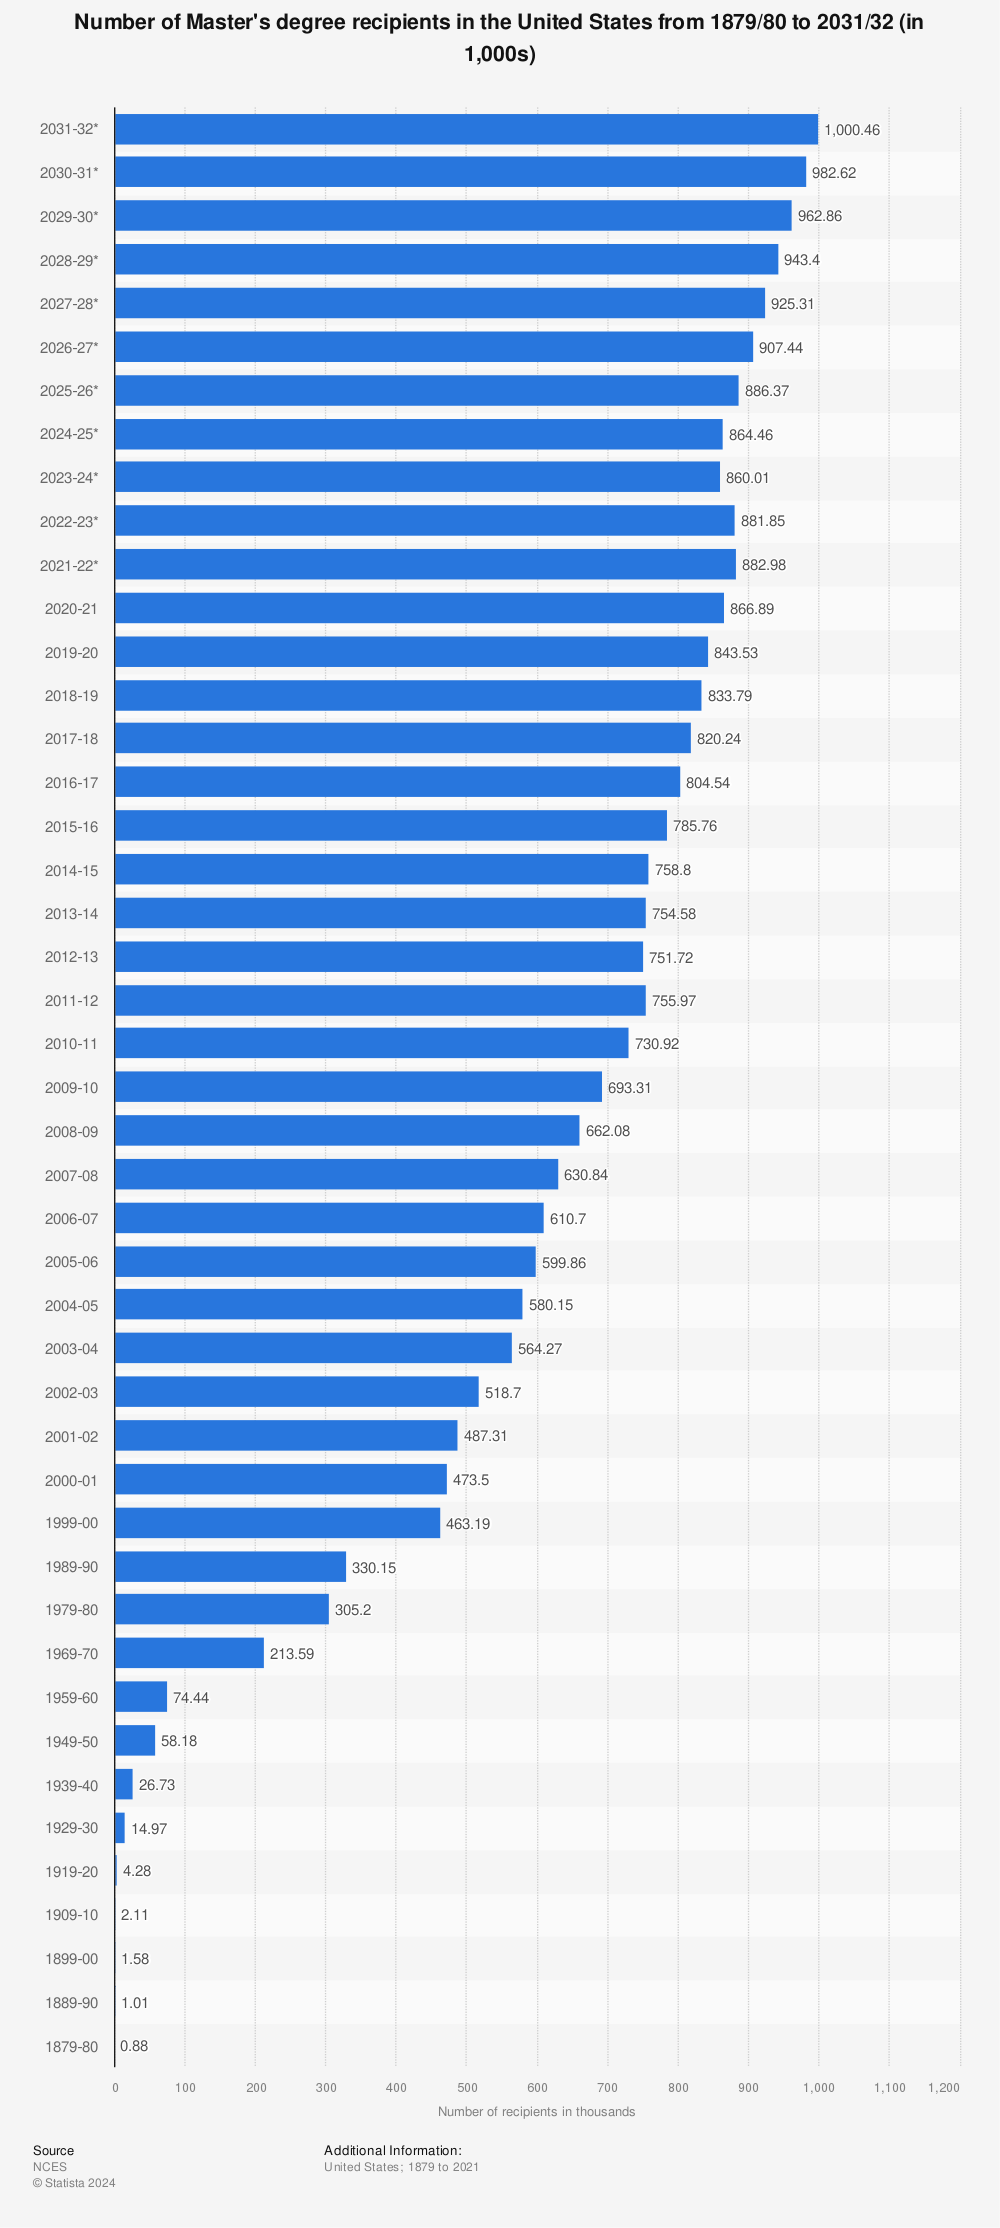 Statistic: Number of Master's degree recipients in the United States from 1879/80 to 2029/30 (in 1,000s) | Statista